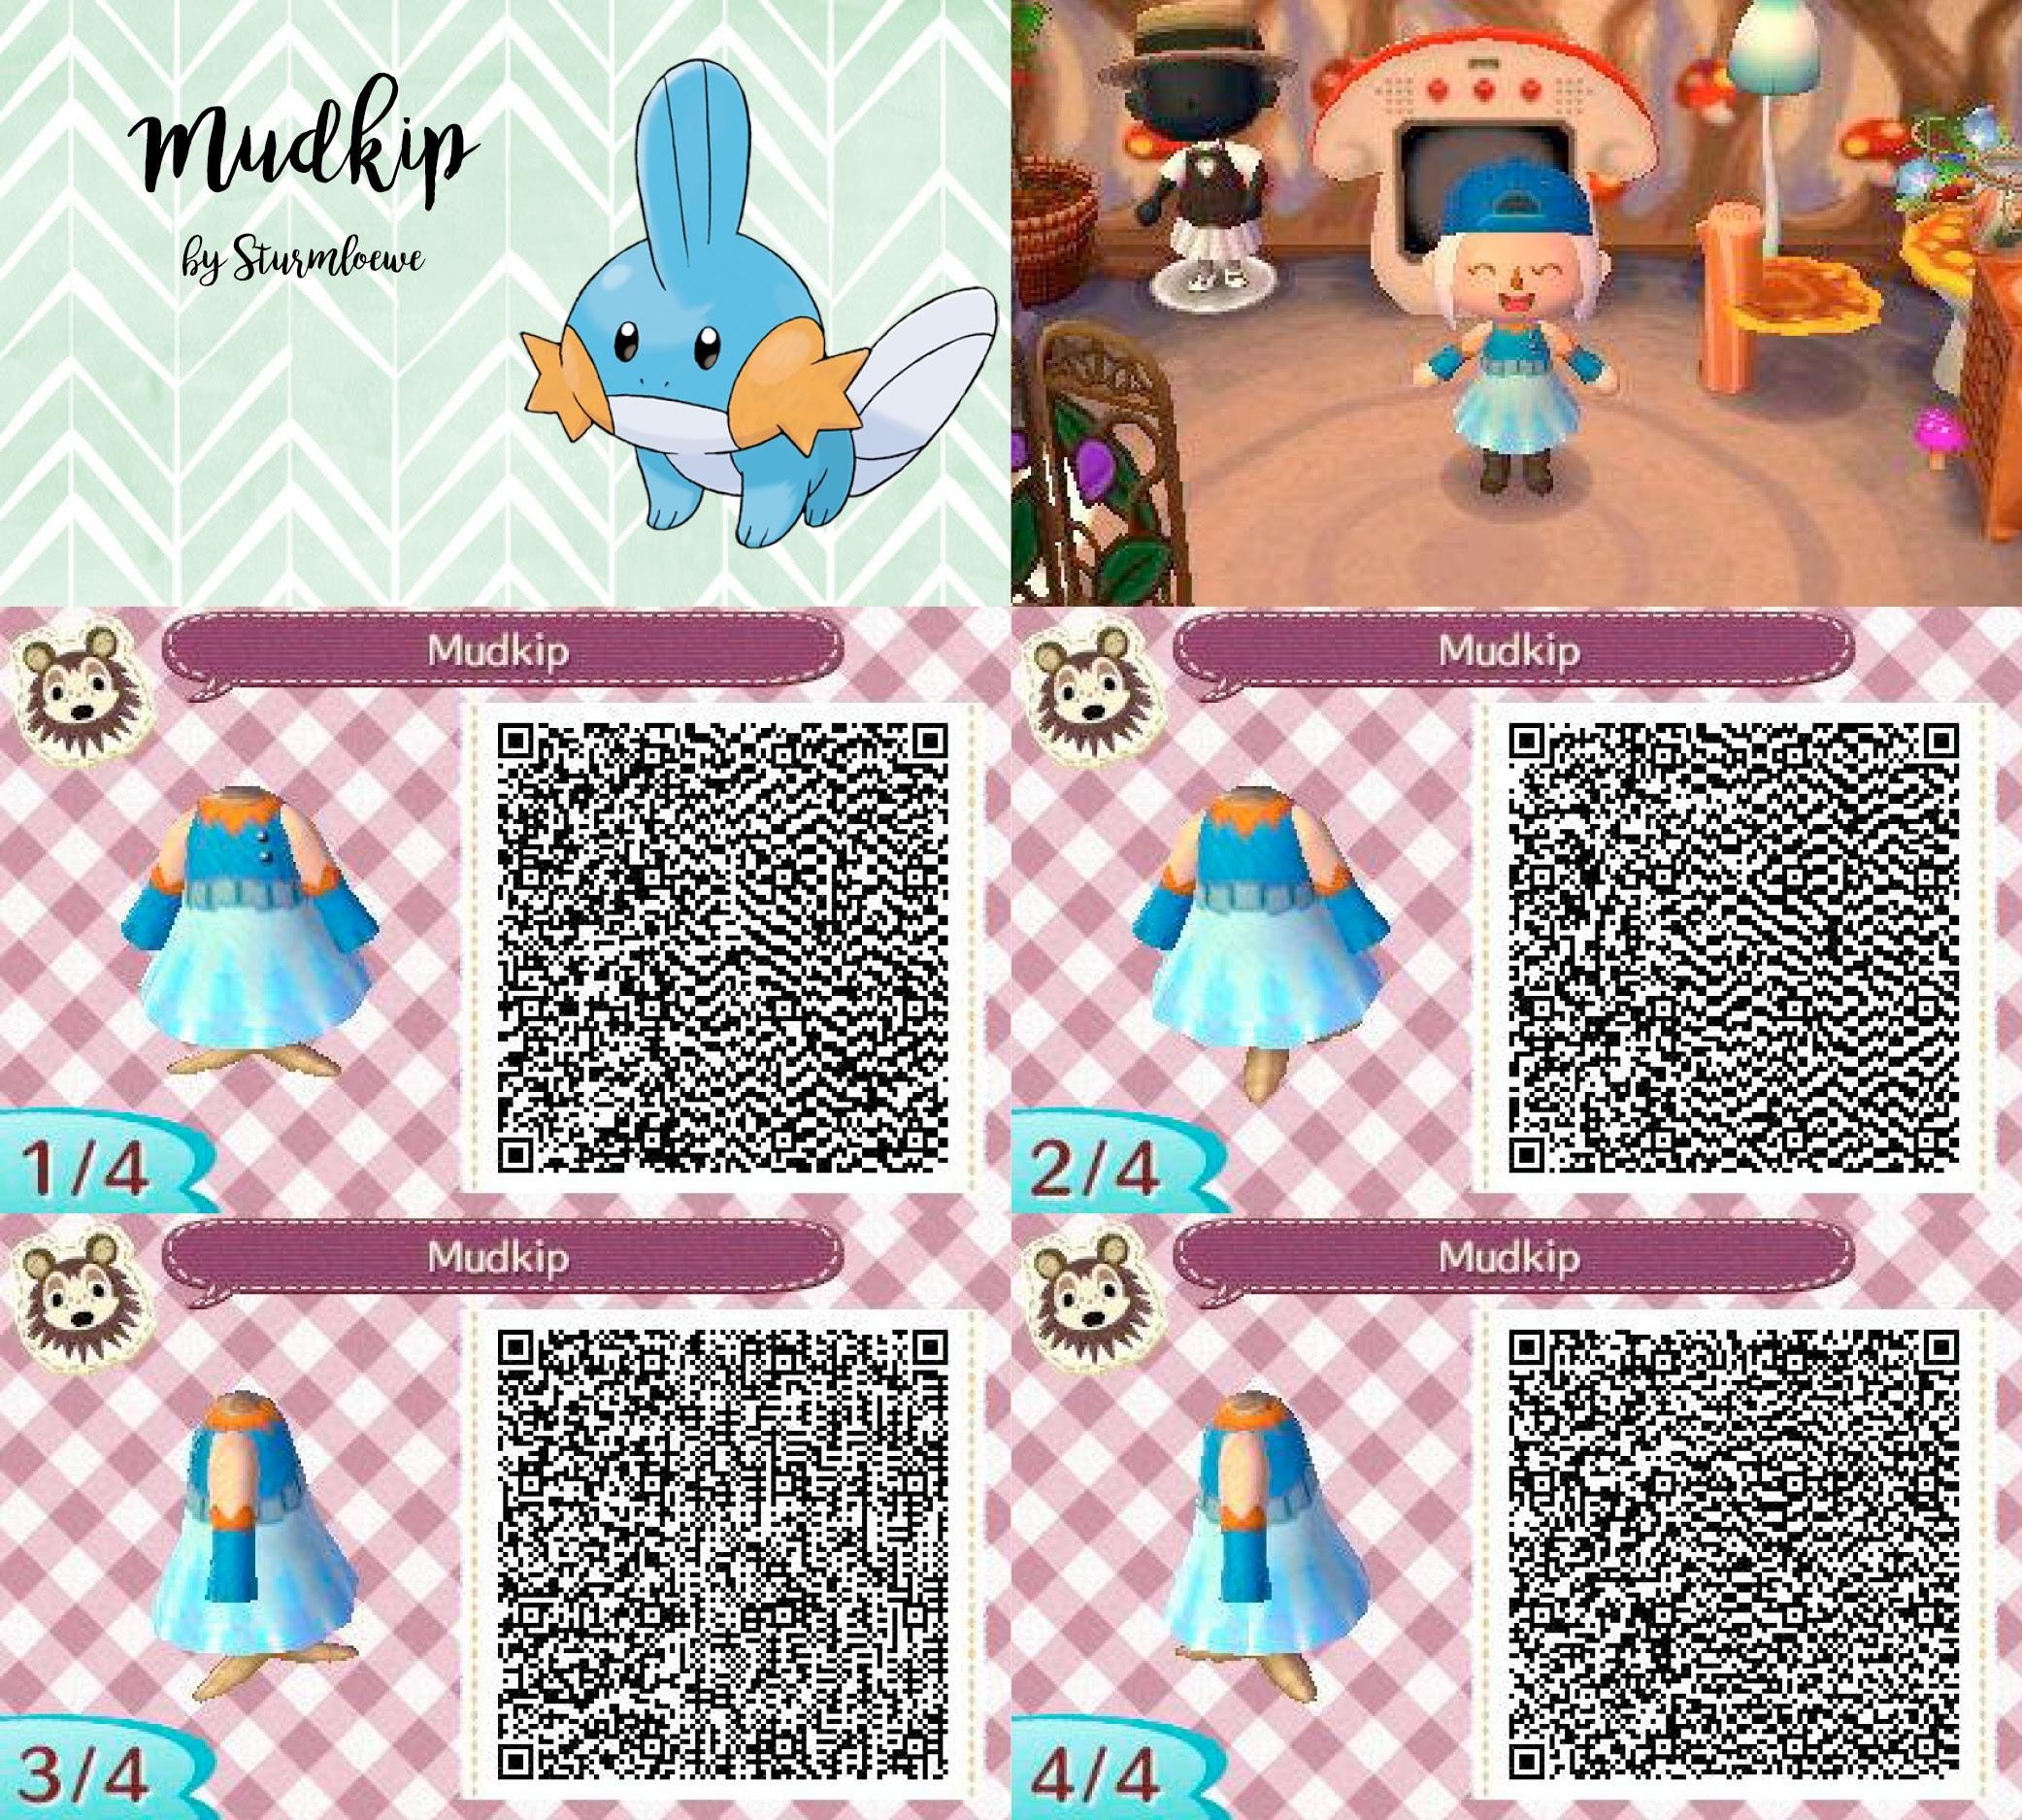 2083x1875 Acnl wallpapers on wallpaperplay jpg  Acnl wallpaper patterns